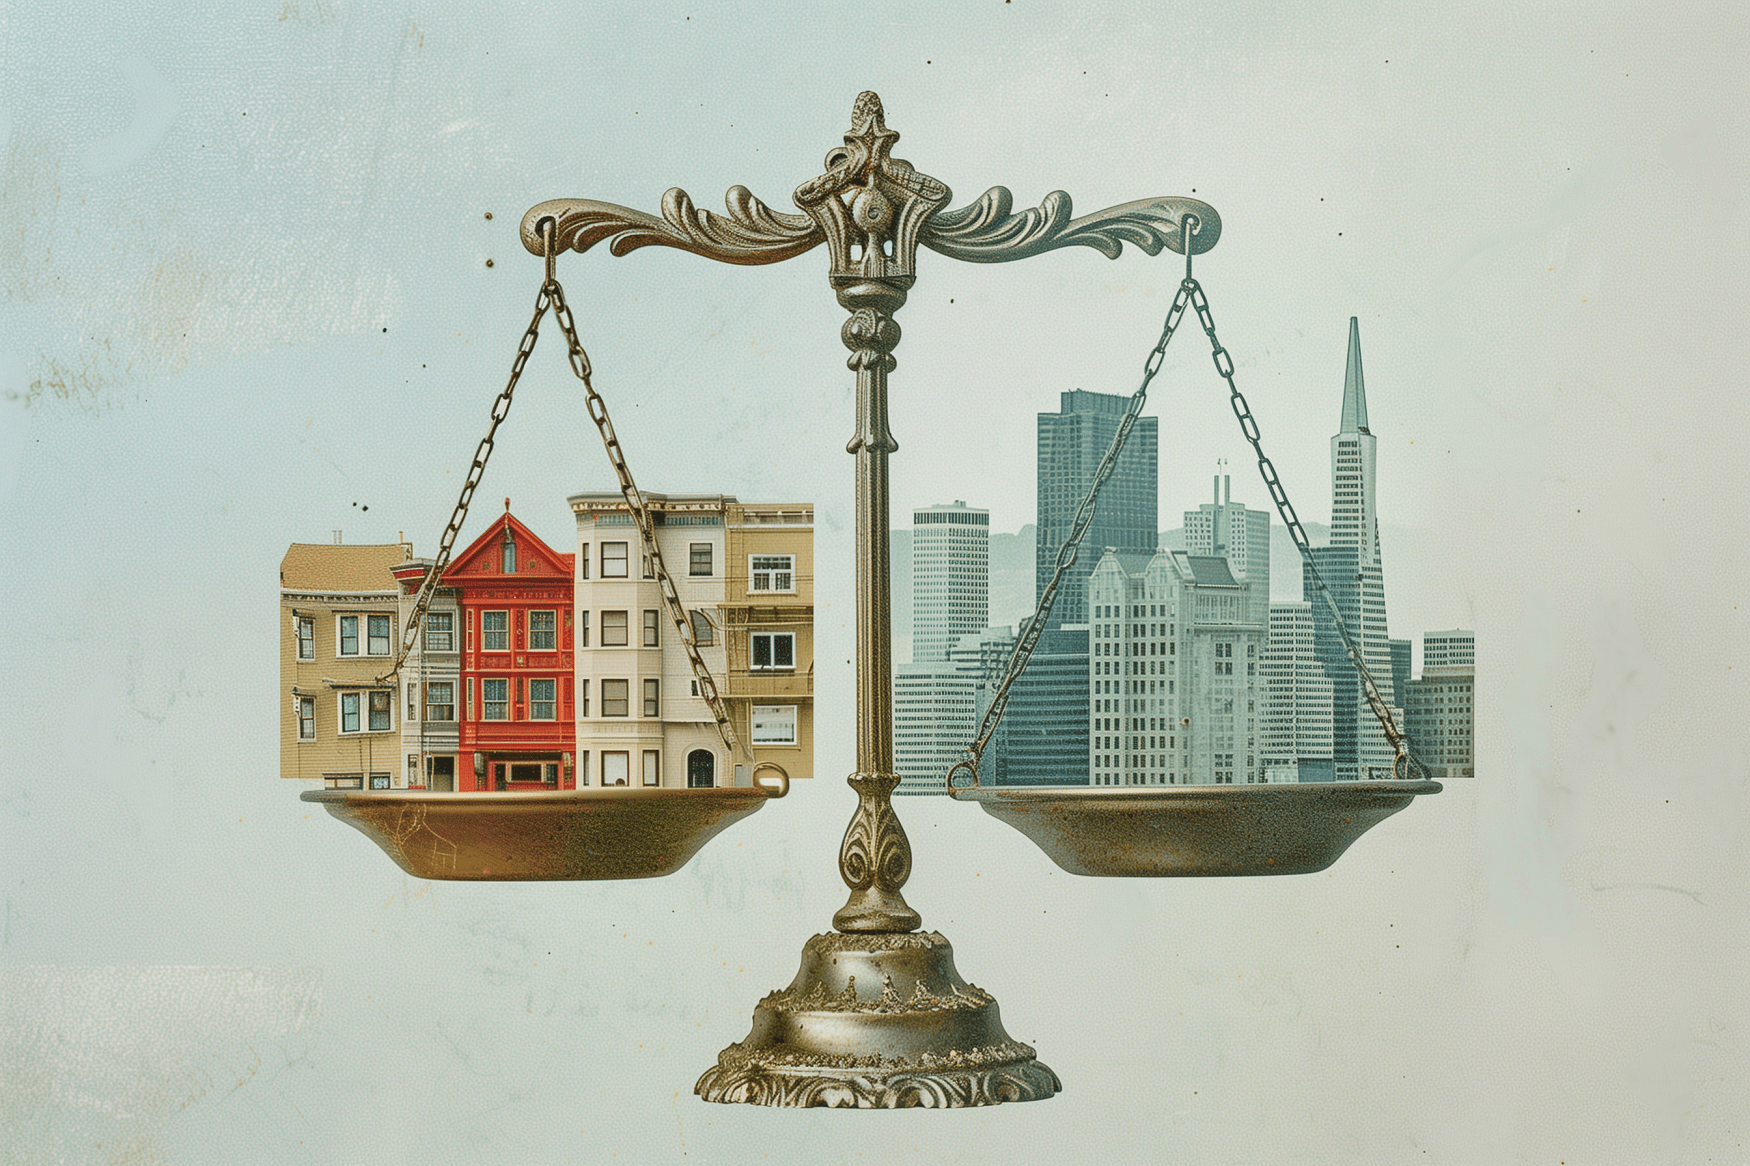 An ornate balance scale with classic houses on one side, modern skyscrapers on the other, symbolizing urban contrast.